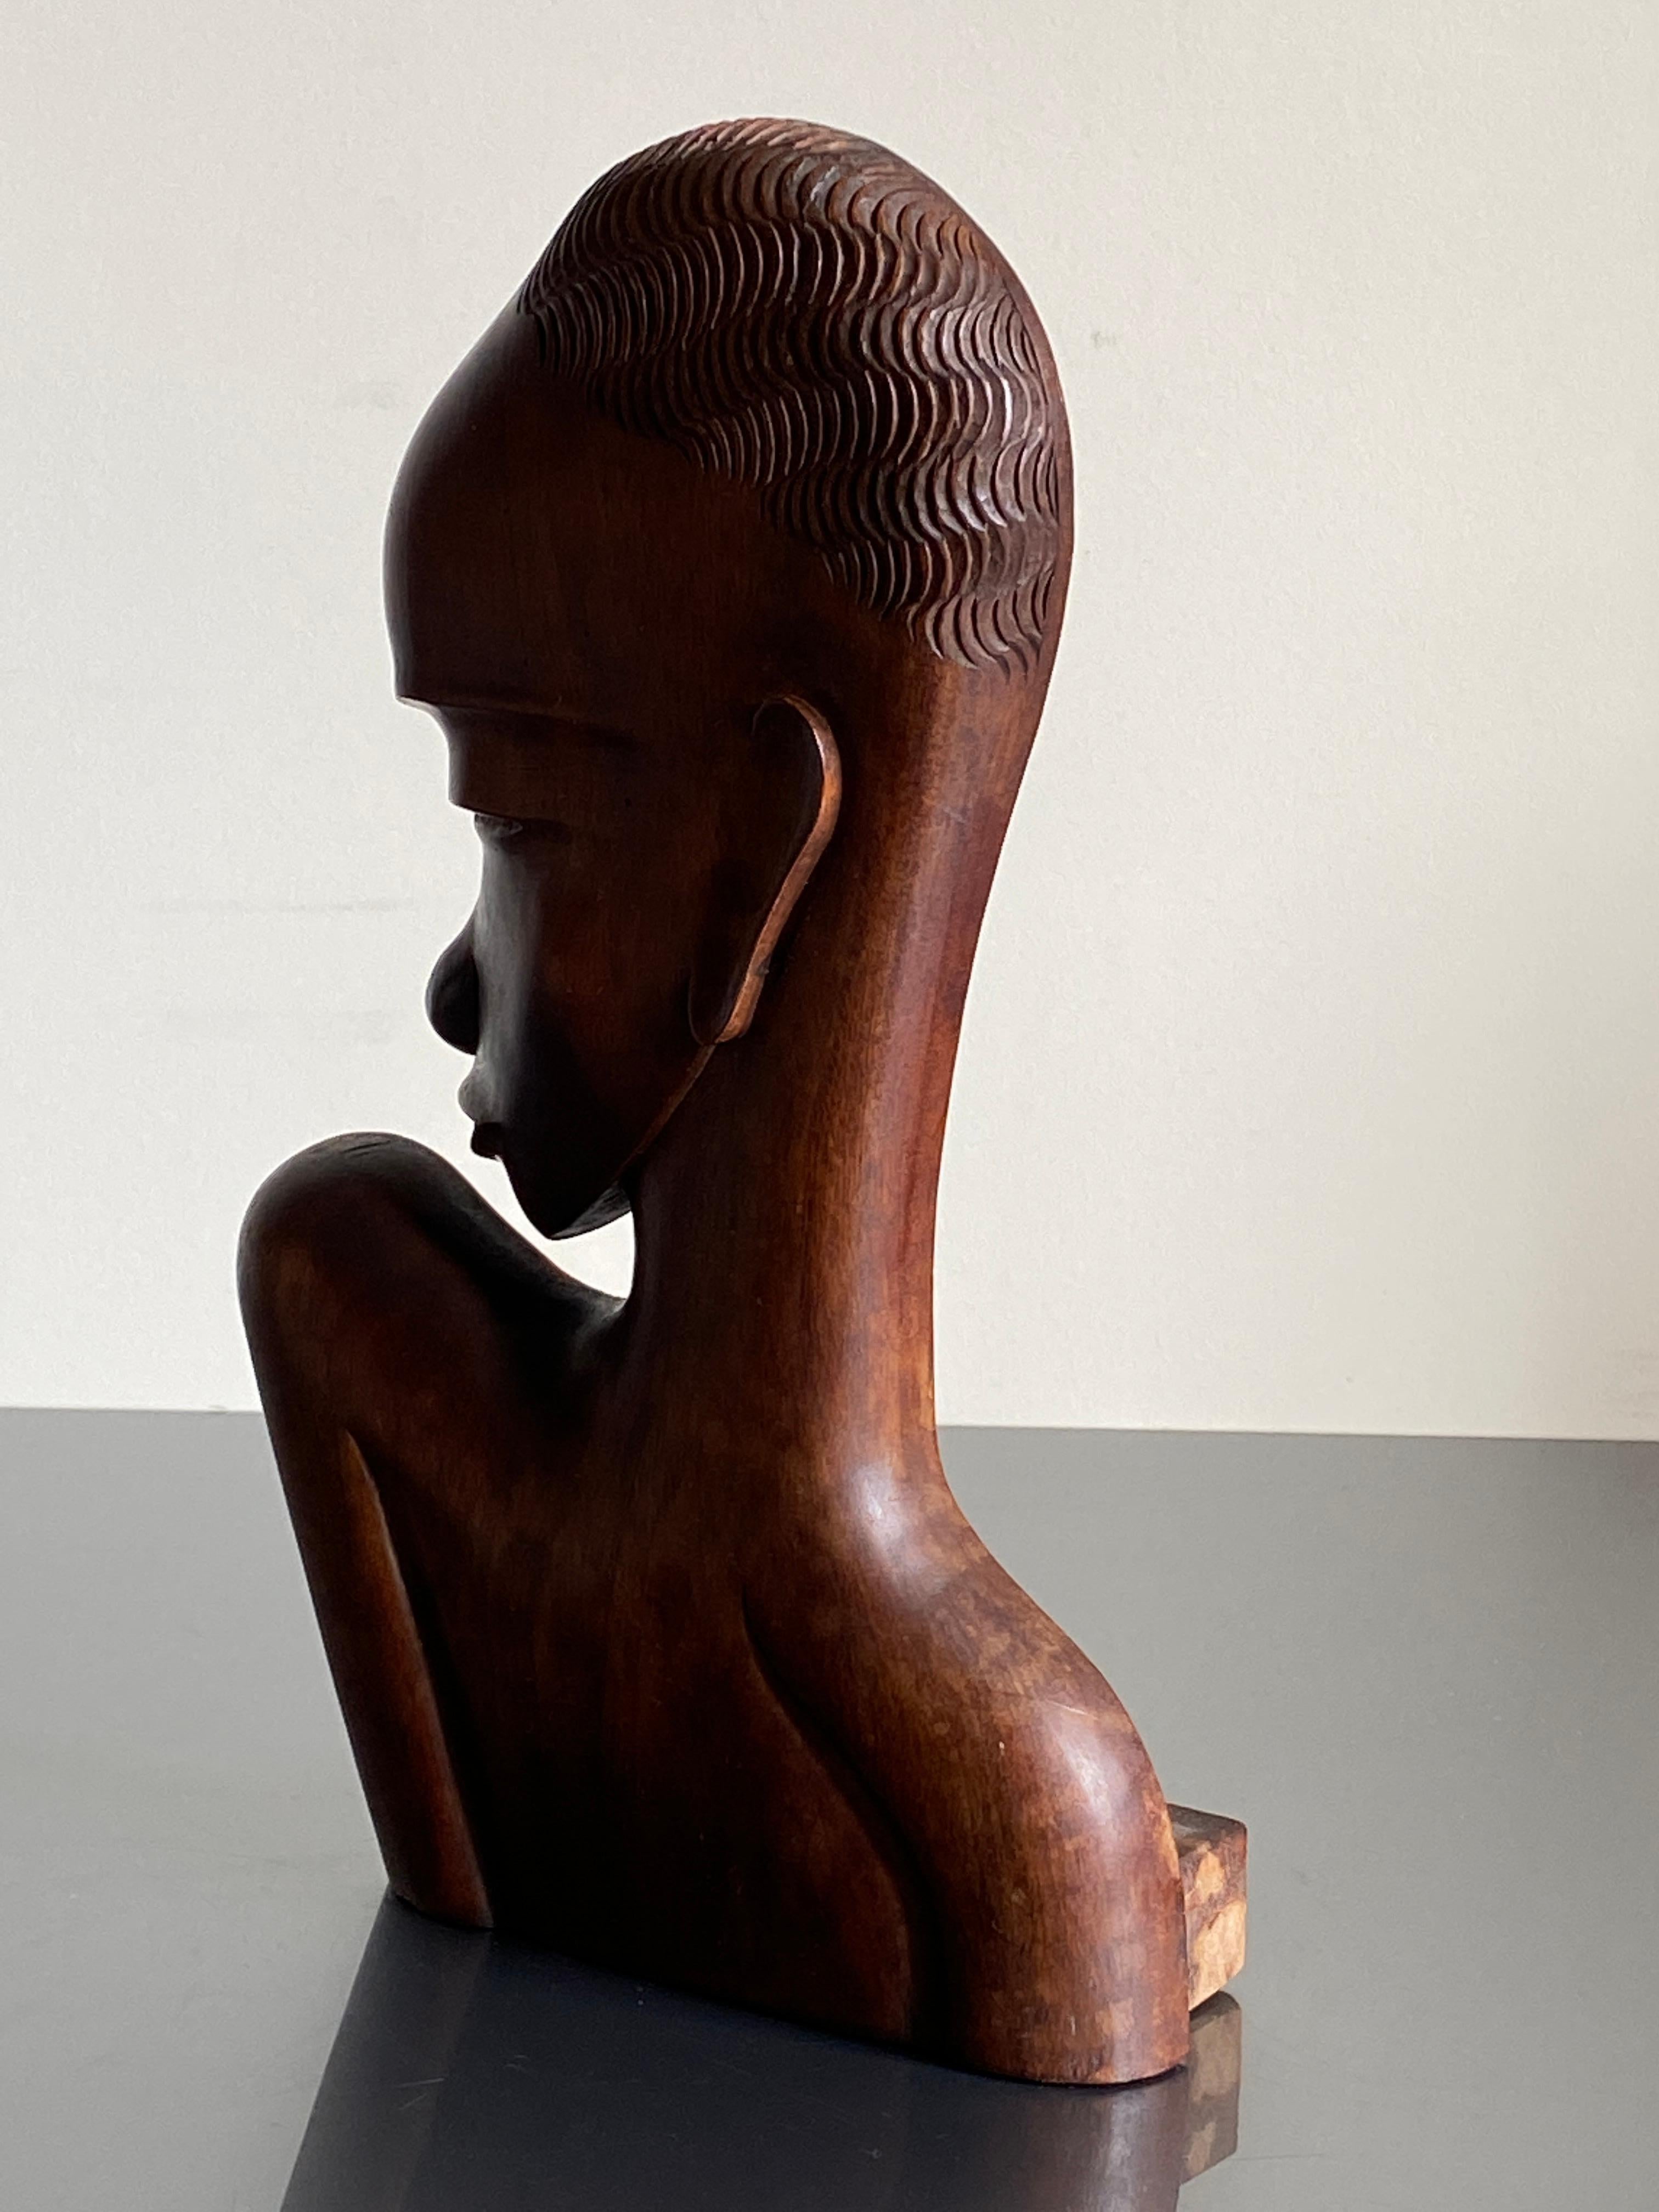 20th Century Art Deco African Sculptural Bust in the style of Karl Hagenauer